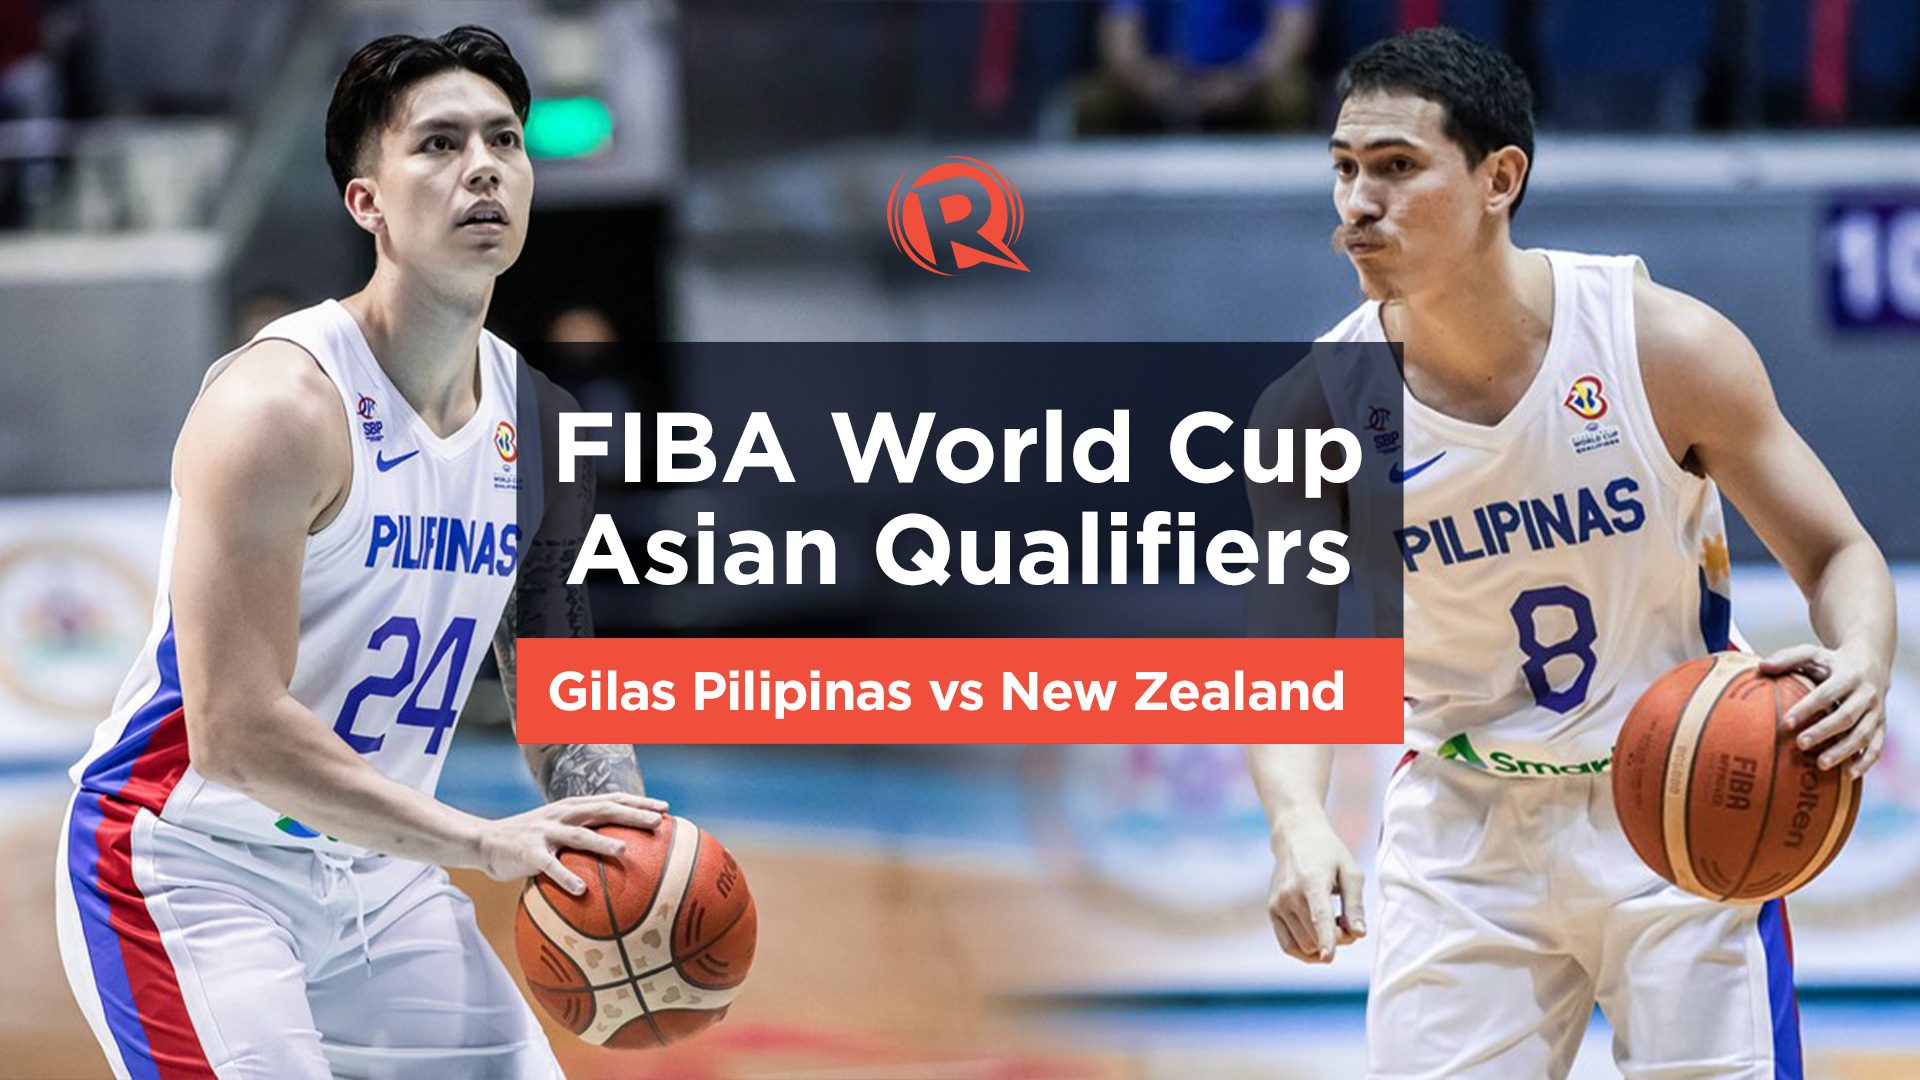 HIGHLIGHTS: Philippines vs New Zealand – FIBA World Cup Asian Qualifiers 2022